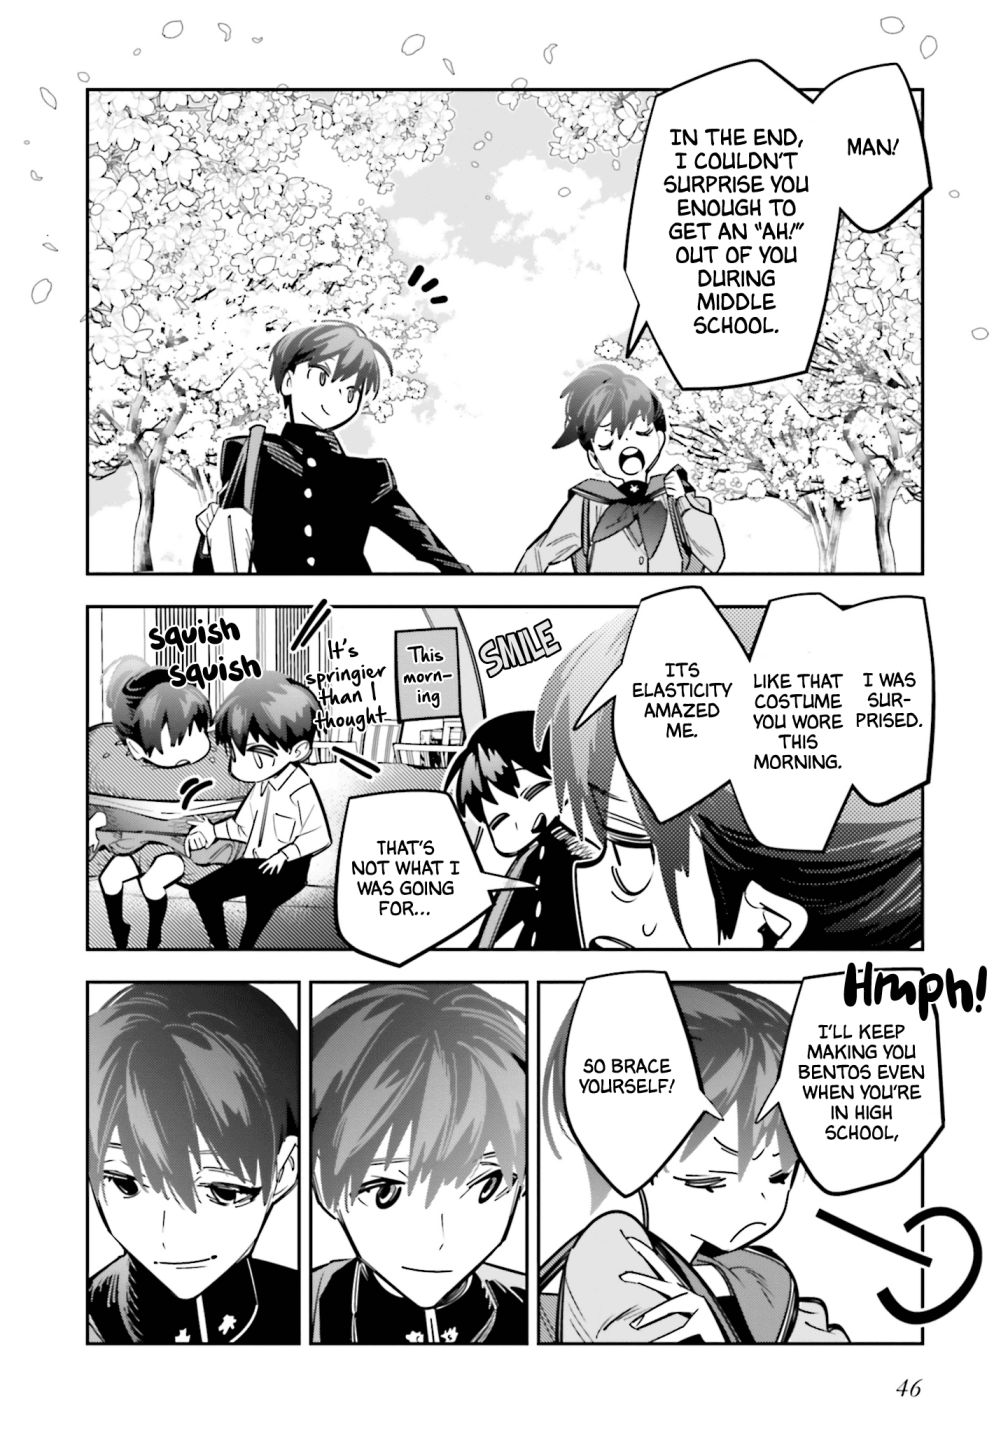 I Reincarnated As The Little Sister Of A Death Game Manga’S Murd3R Mastermind And Failed - chapter 6 - #6